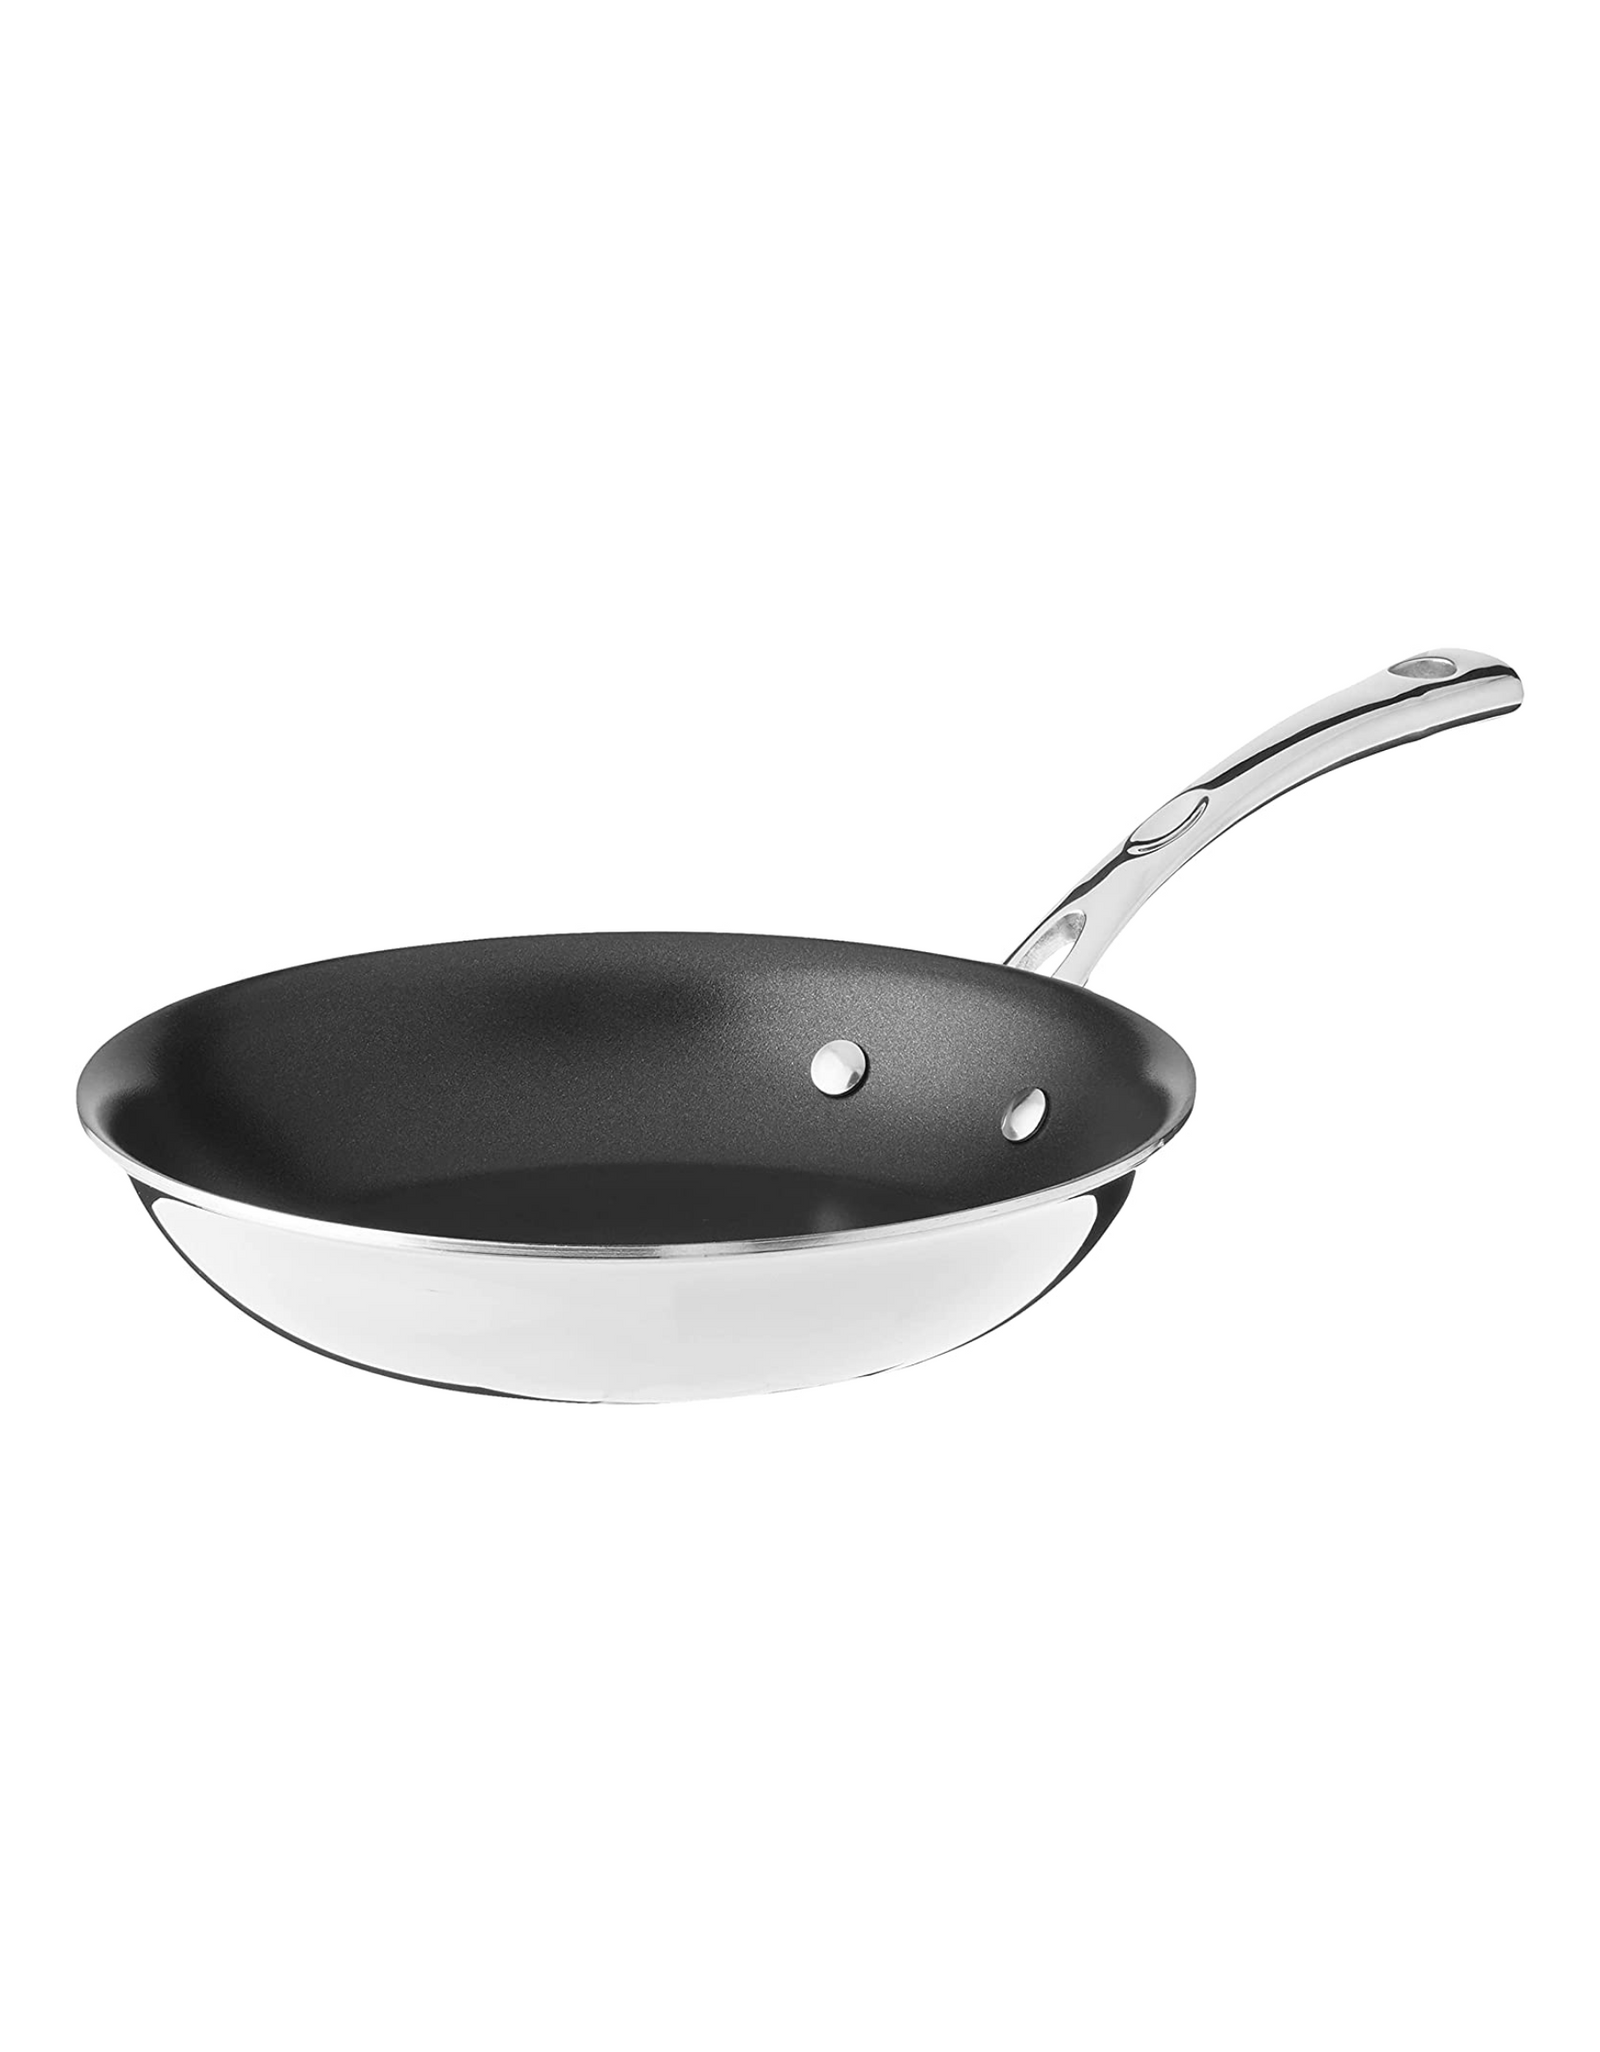 Cuisinart French Classic Tri-Ply Stainless Nonstick Fry Pan, 8-Inch